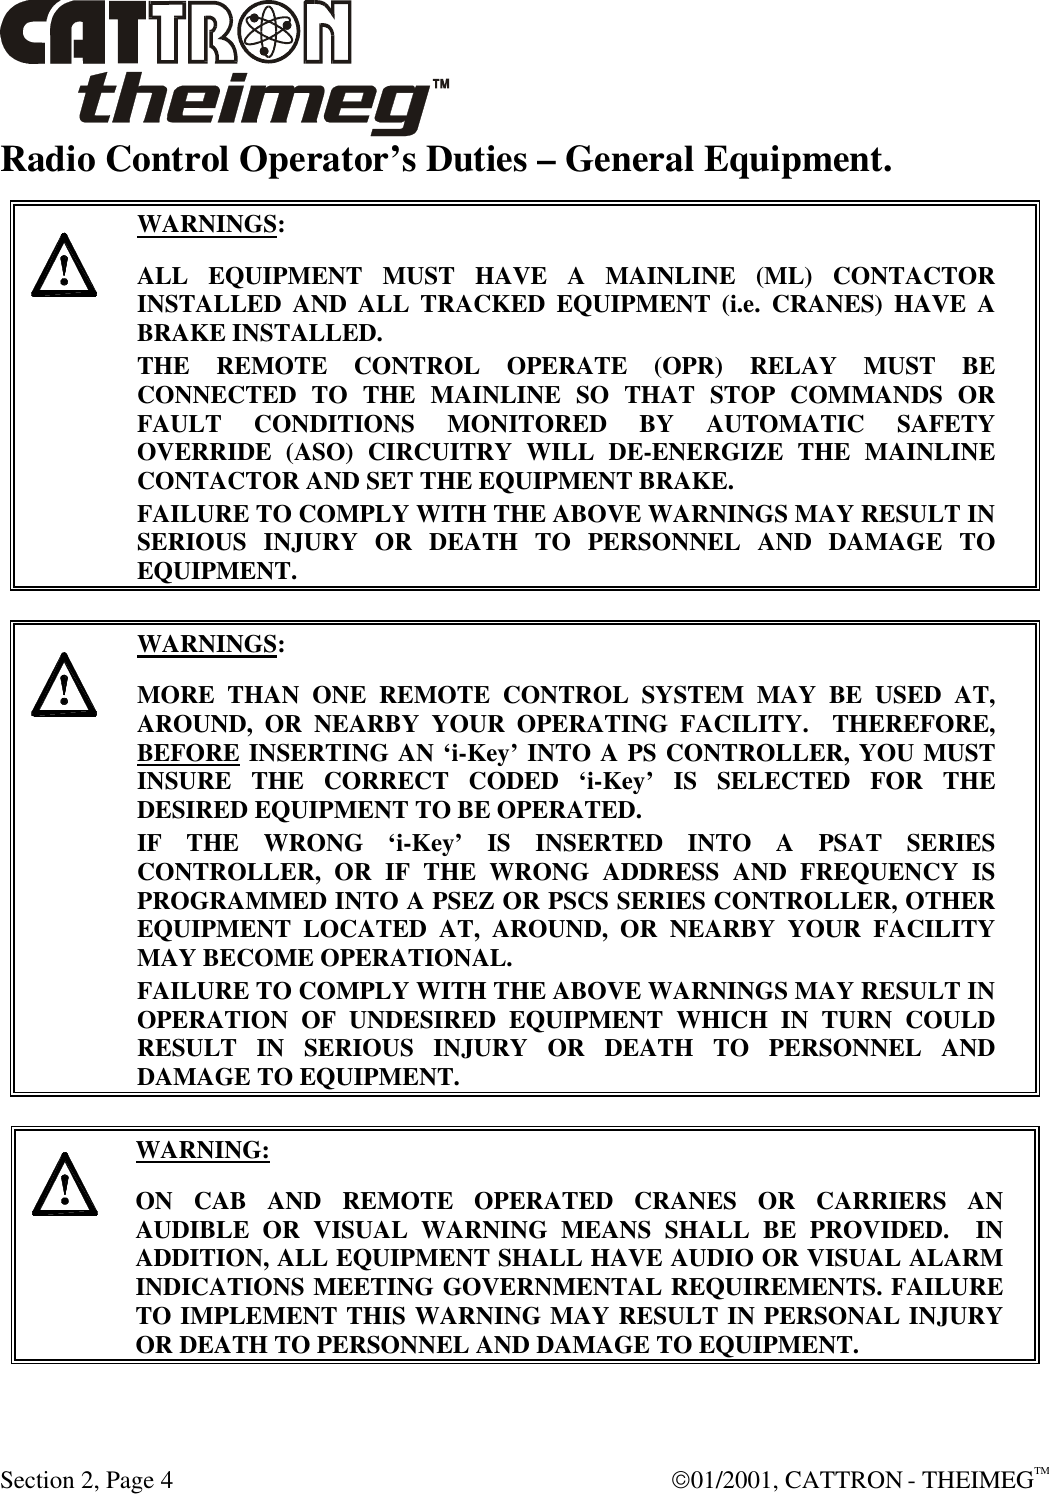  Section 2, Page 4  01/2001, CATTRON - THEIMEGTM Radio Control Operator’s Duties – General Equipment.      WARNINGS: ALL EQUIPMENT MUST HAVE A MAINLINE (ML) CONTACTOR INSTALLED AND ALL TRACKED EQUIPMENT (i.e. CRANES) HAVE A BRAKE INSTALLED. THE REMOTE CONTROL OPERATE (OPR) RELAY MUST BE CONNECTED TO THE MAINLINE SO THAT STOP COMMANDS OR FAULT CONDITIONS MONITORED BY AUTOMATIC SAFETY OVERRIDE (ASO) CIRCUITRY WILL DE-ENERGIZE THE MAINLINE CONTACTOR AND SET THE EQUIPMENT BRAKE.  FAILURE TO COMPLY WITH THE ABOVE WARNINGS MAY RESULT IN SERIOUS INJURY OR DEATH TO PERSONNEL AND DAMAGE TO EQUIPMENT.       WARNINGS: MORE THAN ONE REMOTE CONTROL SYSTEM MAY BE USED AT, AROUND, OR NEARBY YOUR OPERATING FACILITY.  THEREFORE, BEFORE INSERTING AN ‘i-Key’ INTO A PS CONTROLLER, YOU MUST INSURE THE CORRECT CODED ‘i-Key’ IS SELECTED FOR THE DESIRED EQUIPMENT TO BE OPERATED. IF THE WRONG ‘i-Key’ IS INSERTED INTO A PSAT SERIES CONTROLLER, OR IF THE WRONG ADDRESS AND FREQUENCY IS PROGRAMMED INTO A PSEZ OR PSCS SERIES CONTROLLER, OTHER EQUIPMENT LOCATED AT, AROUND, OR NEARBY YOUR FACILITY MAY BECOME OPERATIONAL. FAILURE TO COMPLY WITH THE ABOVE WARNINGS MAY RESULT IN OPERATION OF UNDESIRED EQUIPMENT WHICH IN TURN COULD RESULT IN SERIOUS INJURY OR DEATH TO PERSONNEL AND DAMAGE TO EQUIPMENT.       WARNING: ON CAB AND REMOTE OPERATED CRANES OR CARRIERS AN AUDIBLE OR VISUAL WARNING MEANS SHALL BE PROVIDED.  IN ADDITION, ALL EQUIPMENT SHALL HAVE AUDIO OR VISUAL ALARM INDICATIONS MEETING GOVERNMENTAL REQUIREMENTS. FAILURE TO IMPLEMENT THIS WARNING MAY RESULT IN PERSONAL INJURY OR DEATH TO PERSONNEL AND DAMAGE TO EQUIPMENT. 